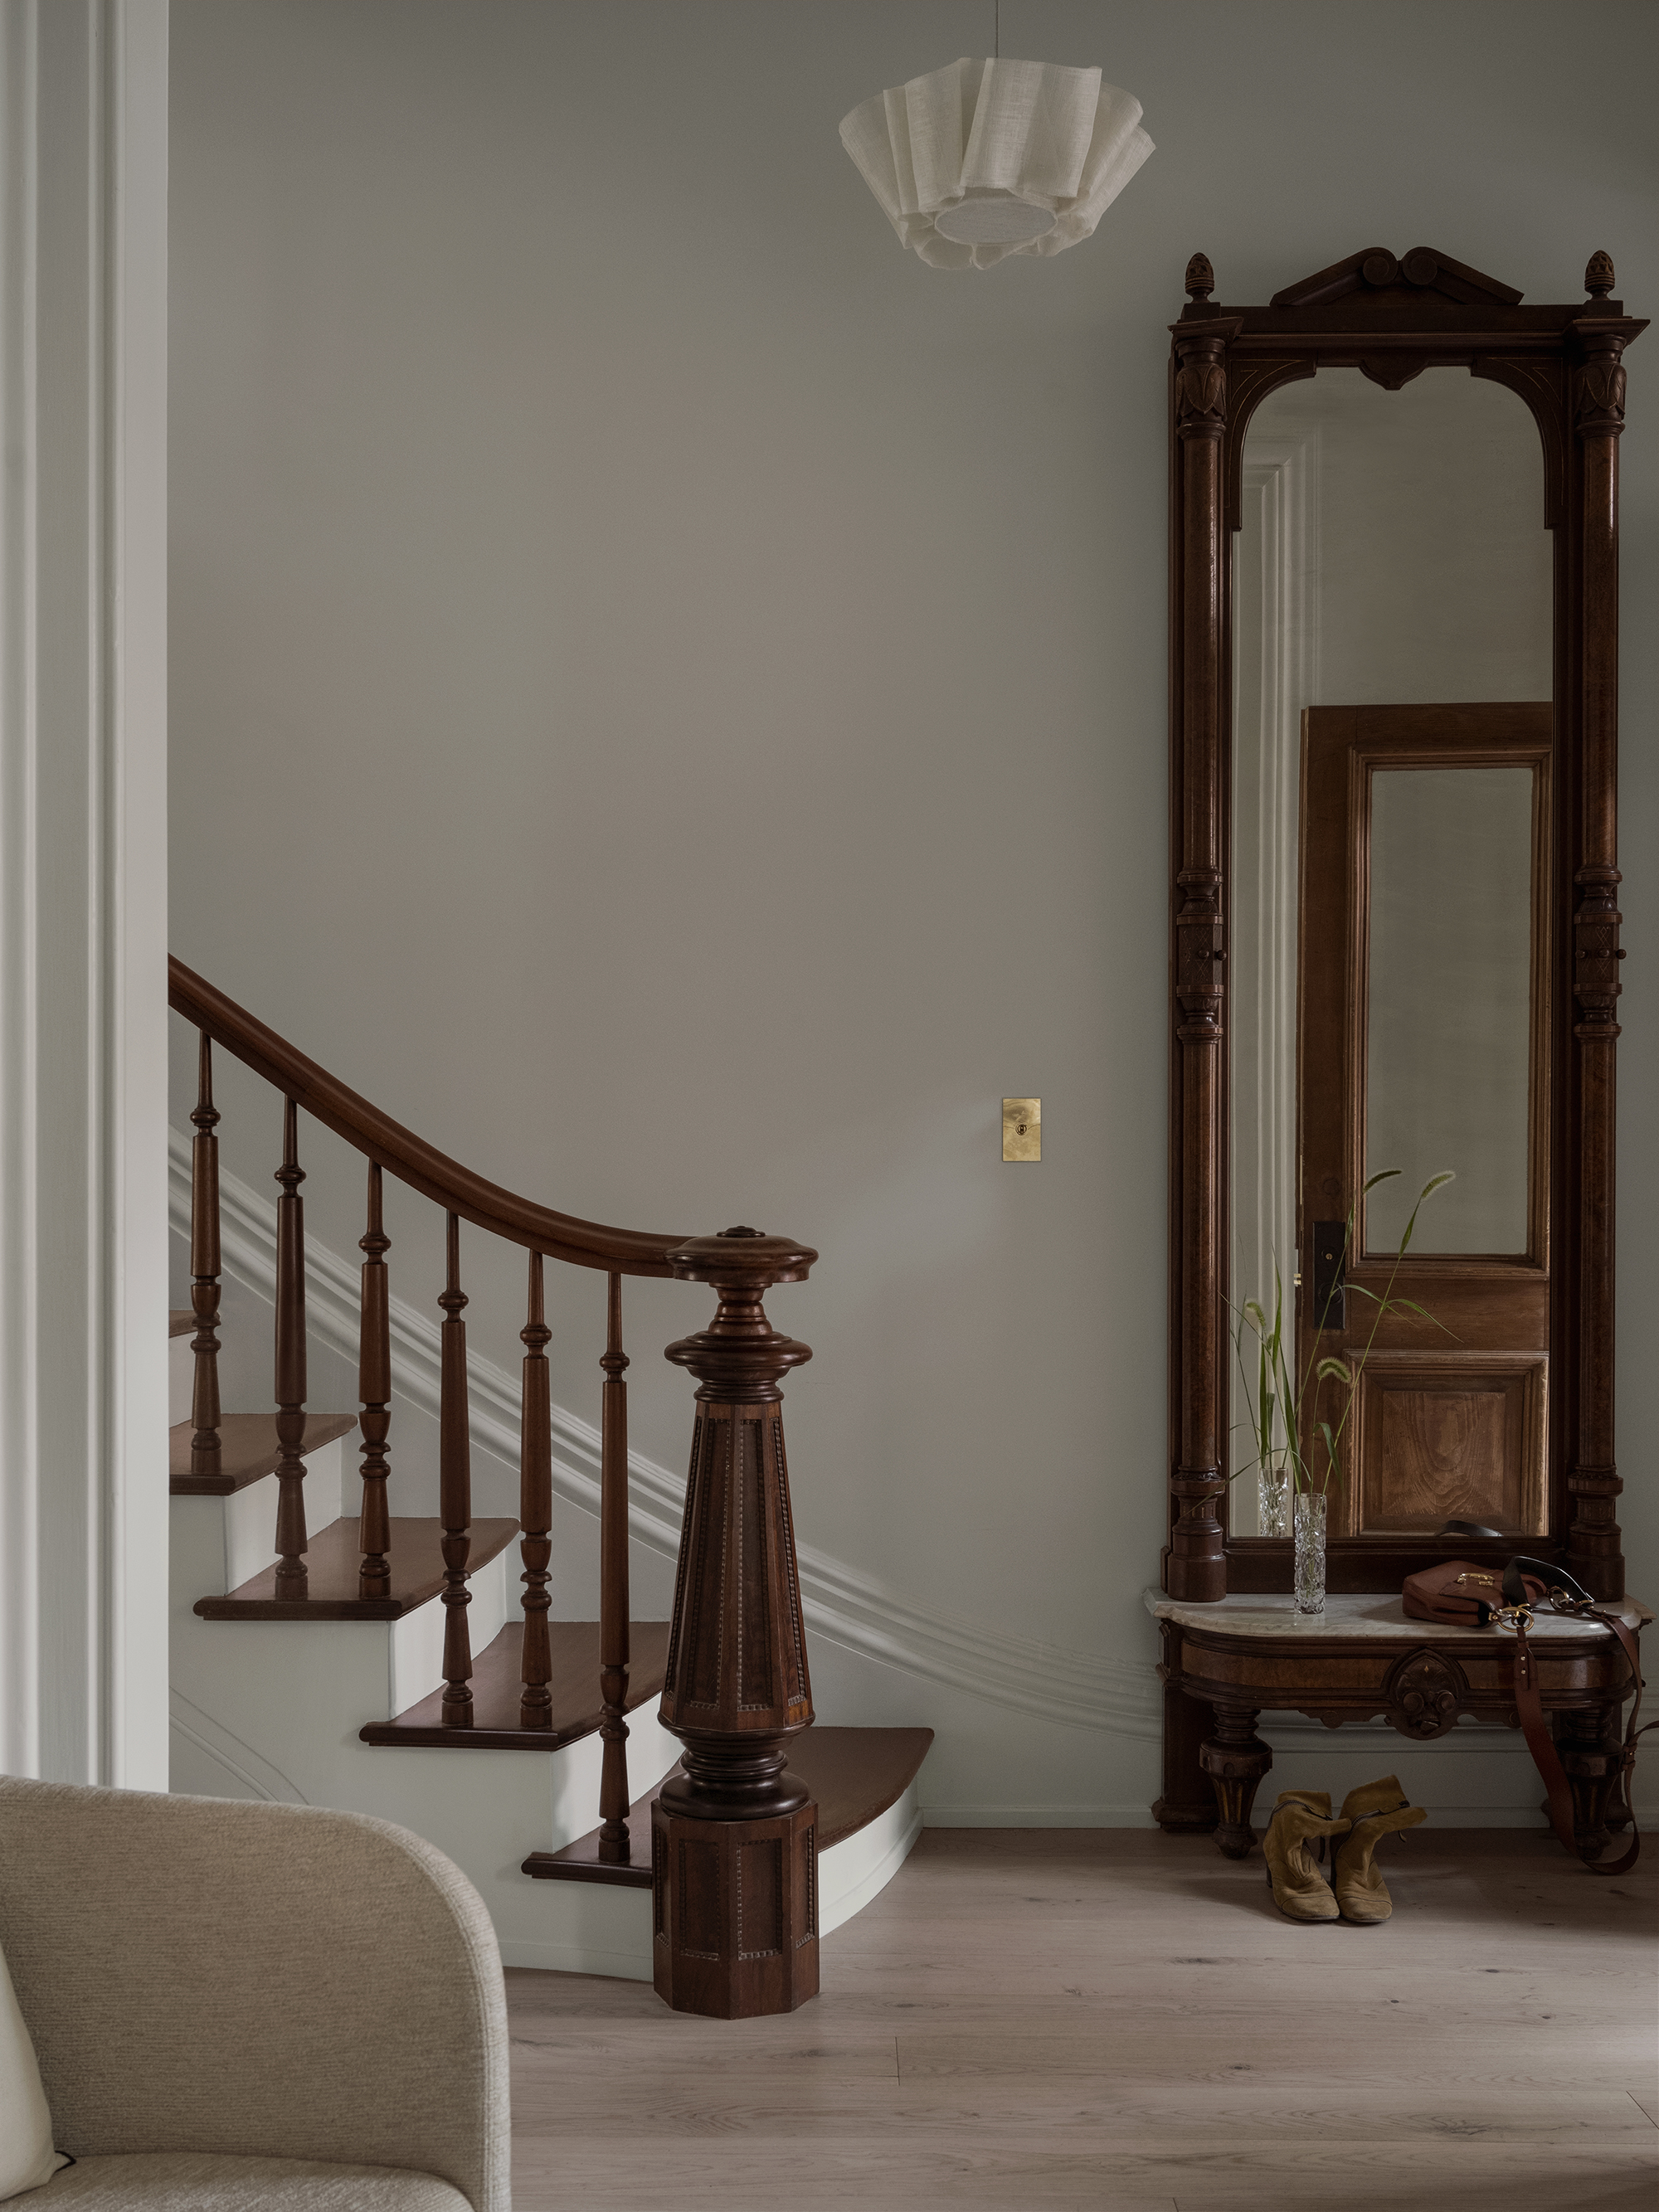 the front stair and mirror are restored originals. the pleated anders light is  29